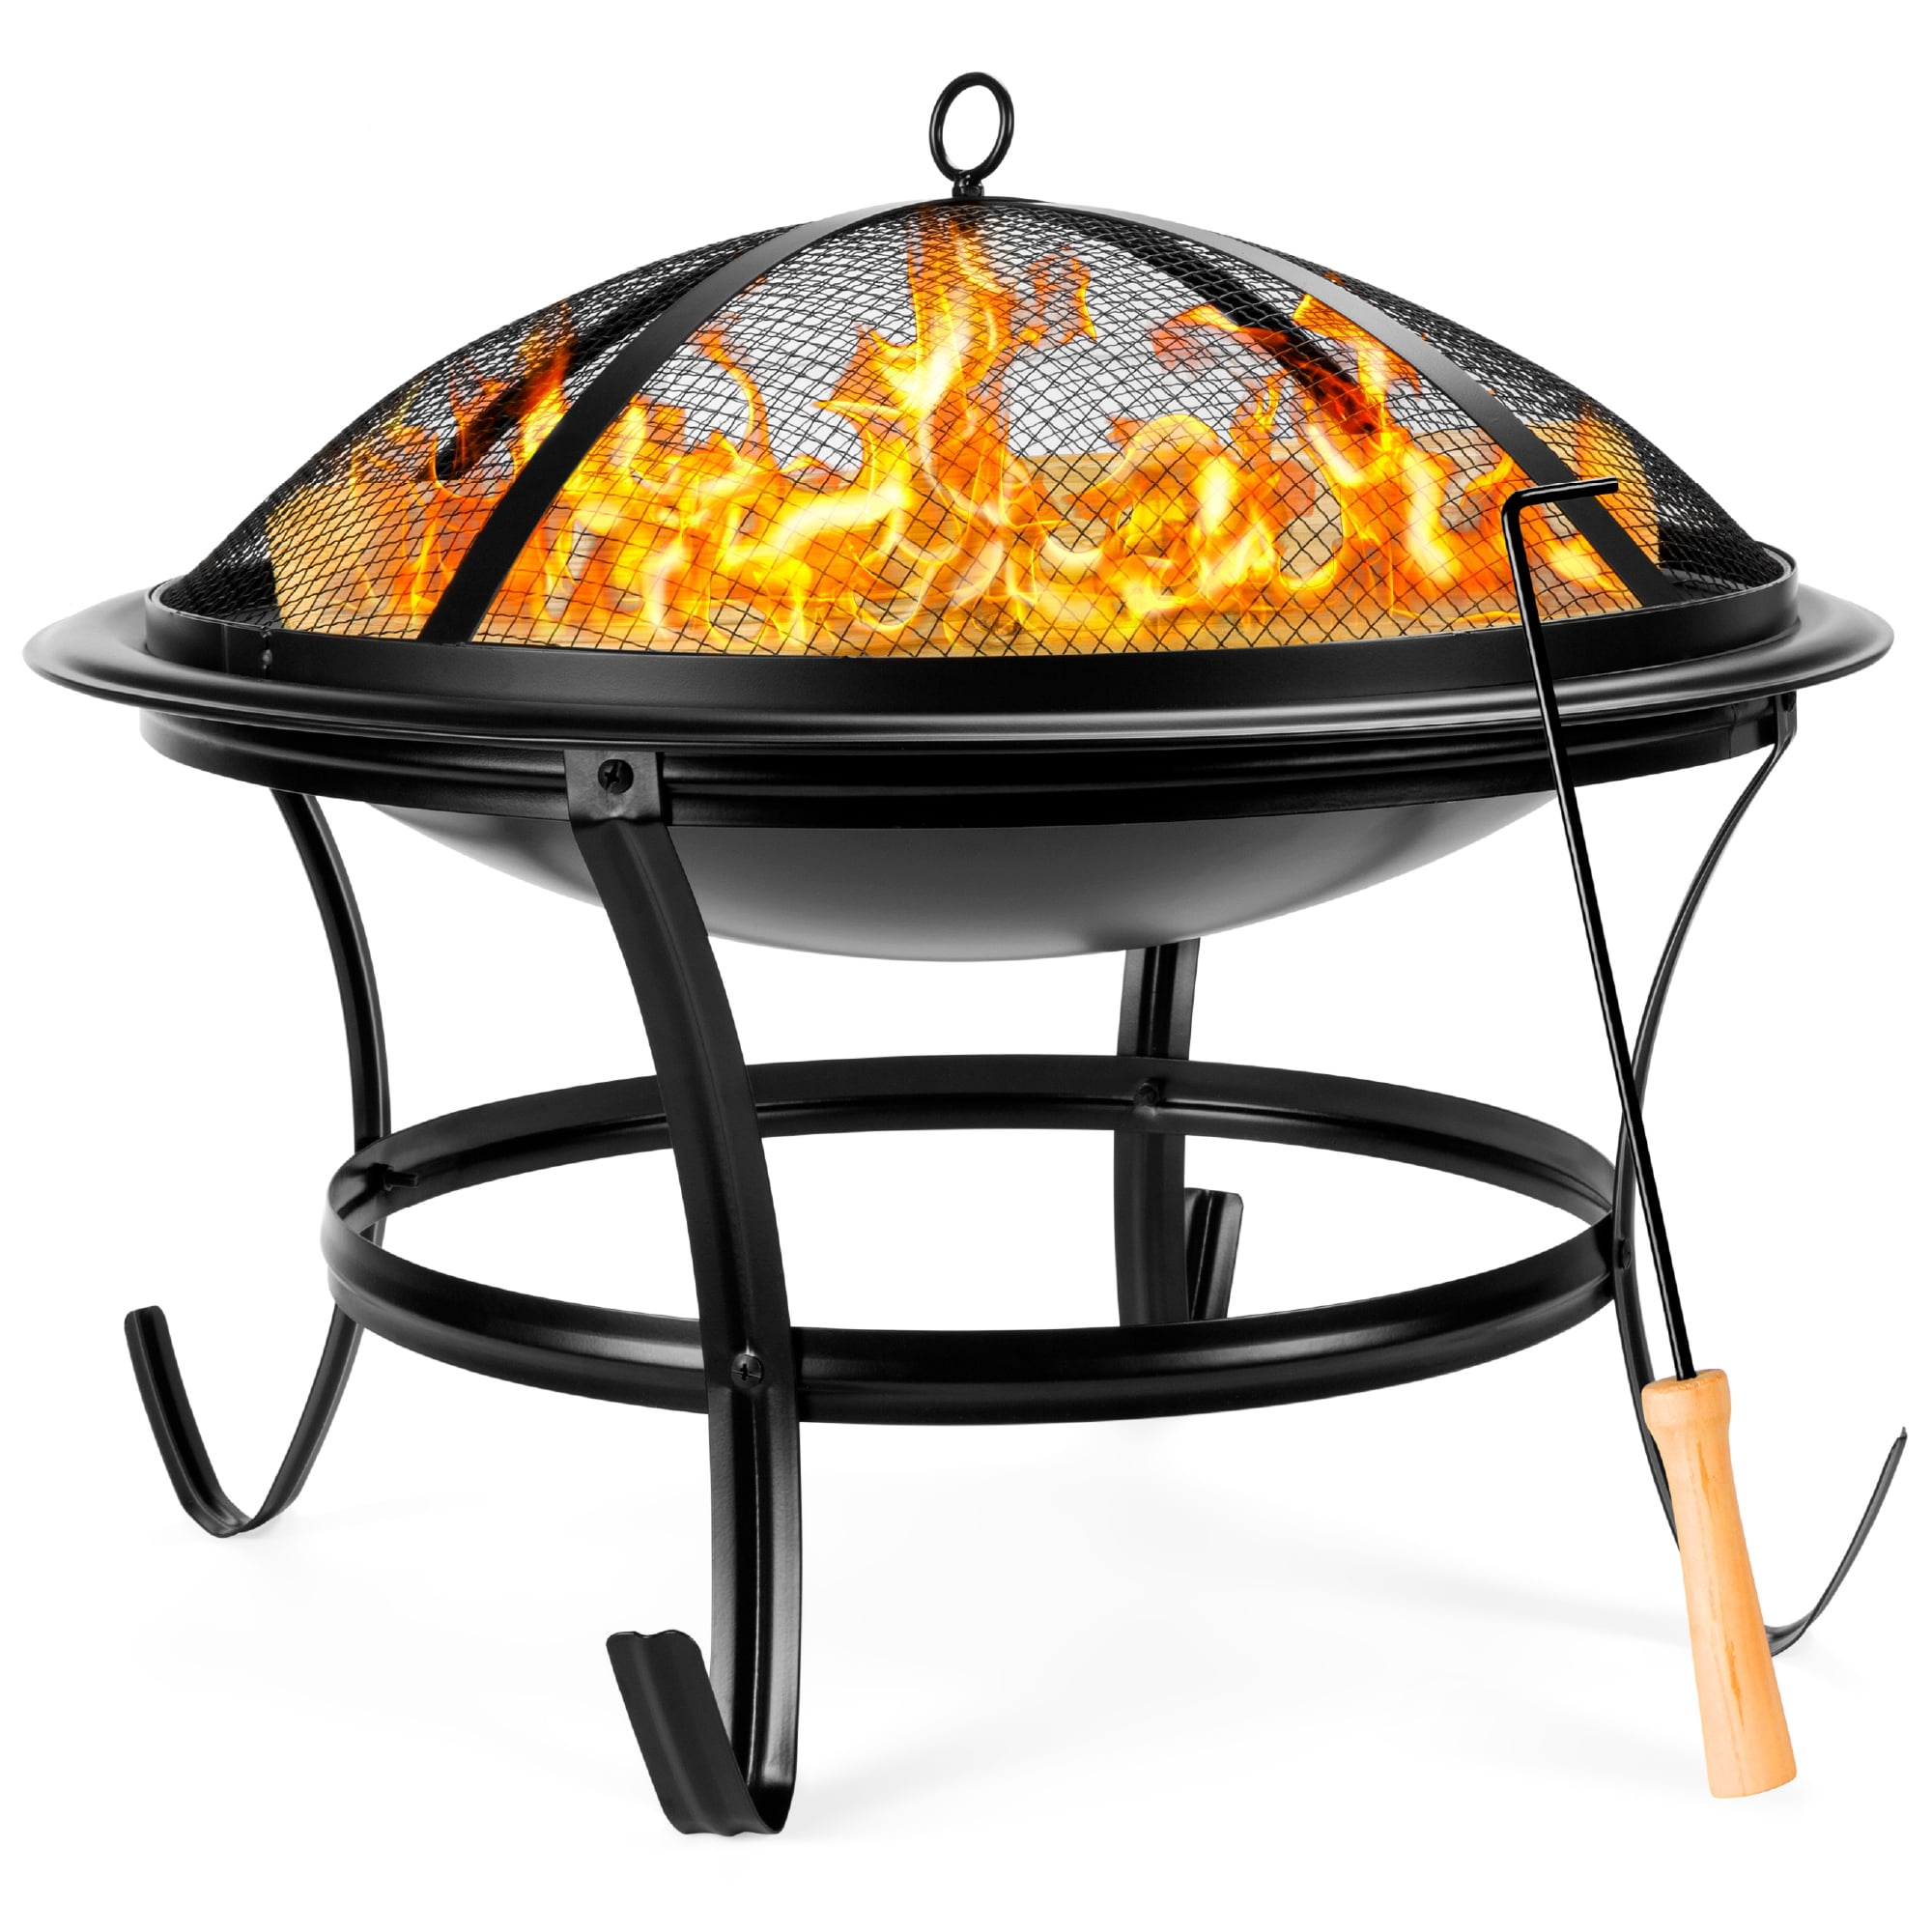 Details about   NEW 28" Outdoor Patio Mobile Portable Round Steel Wood Fire Pit Bowl W/ Wheels 